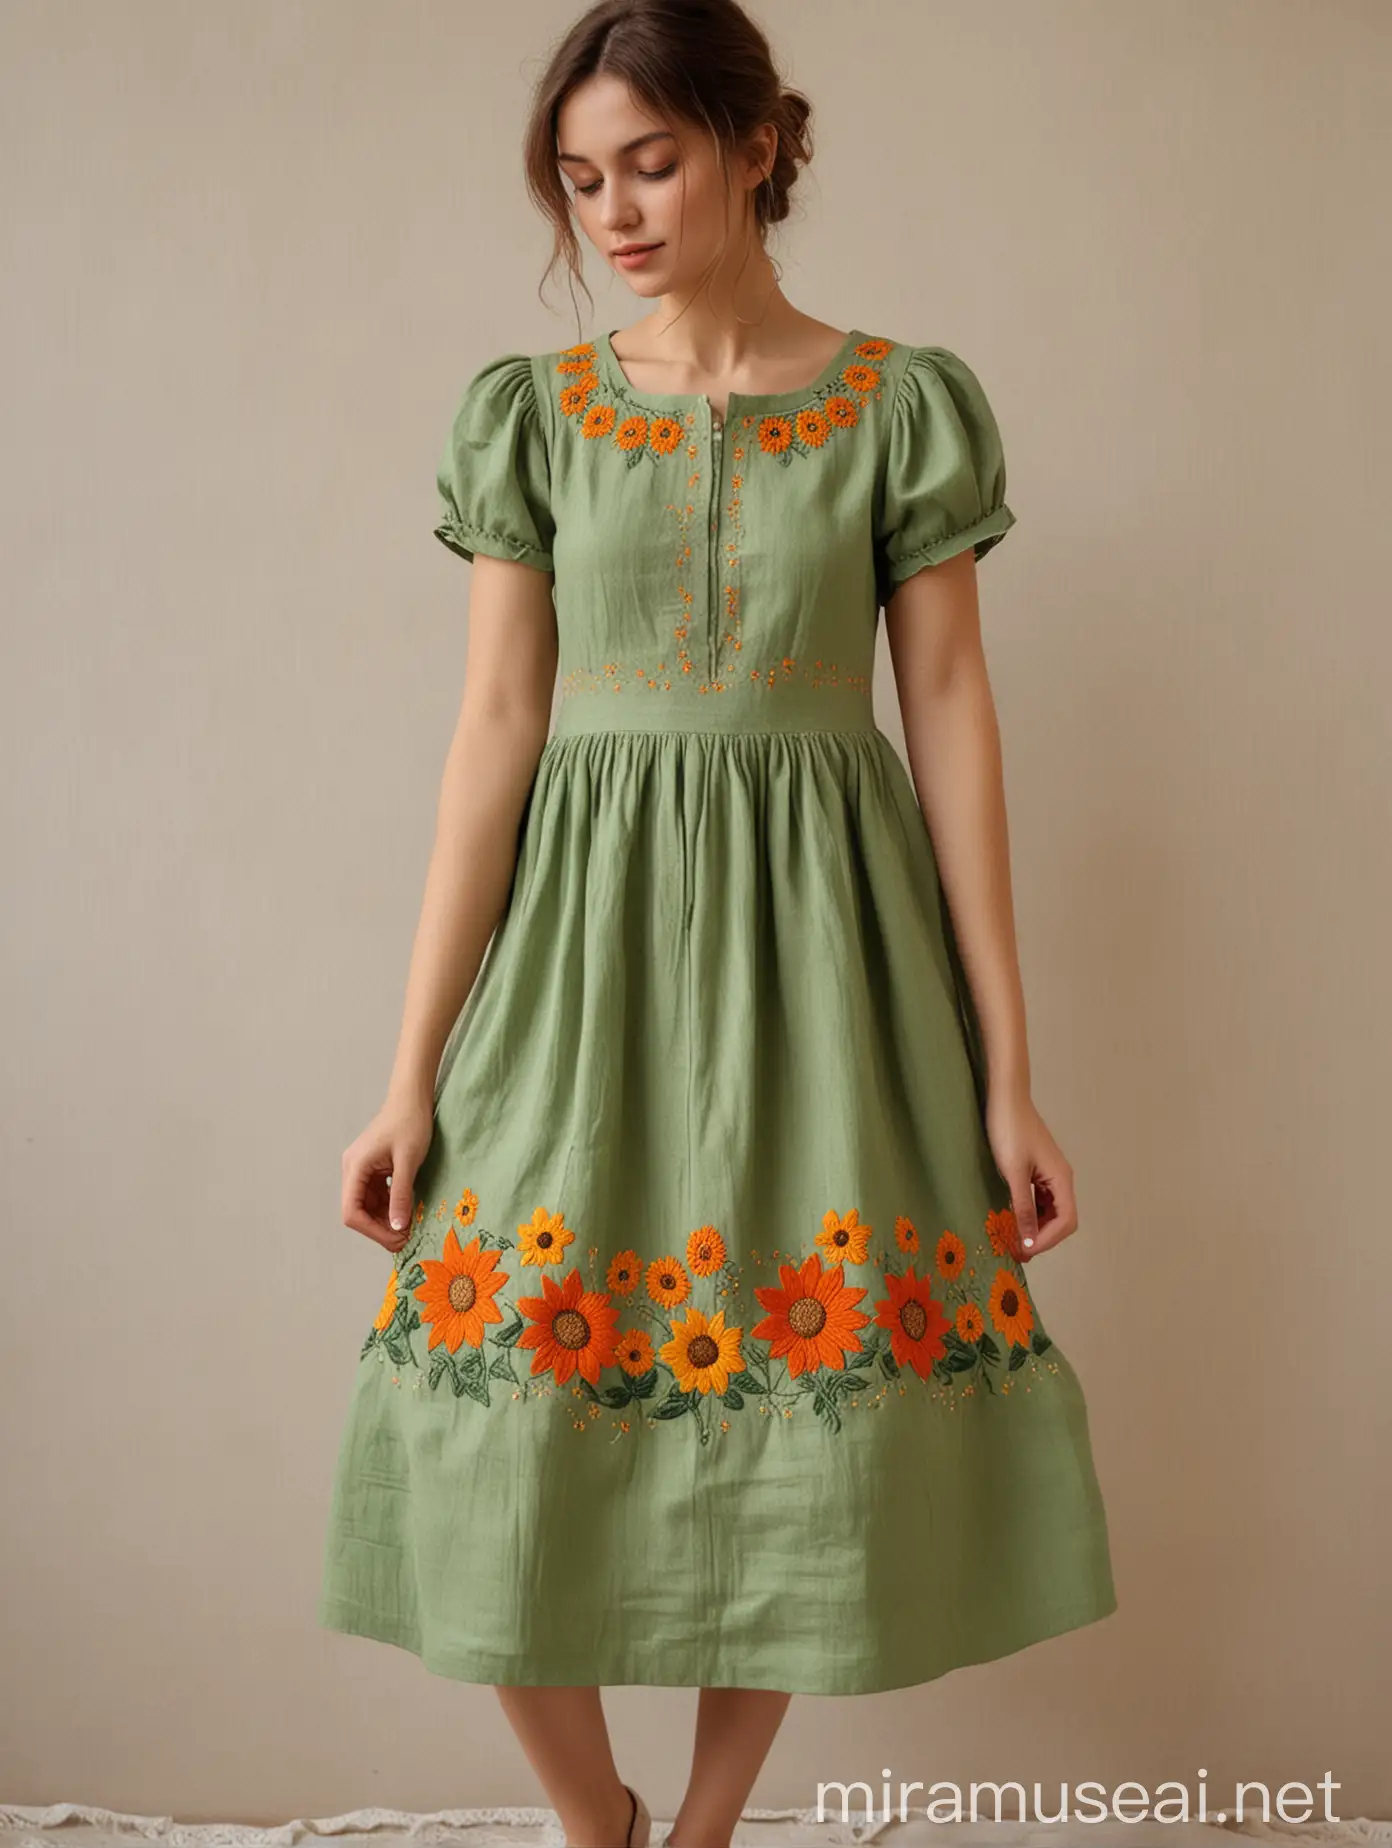 Woman Wearing Green Linen Dress with Sunflower Embroidery